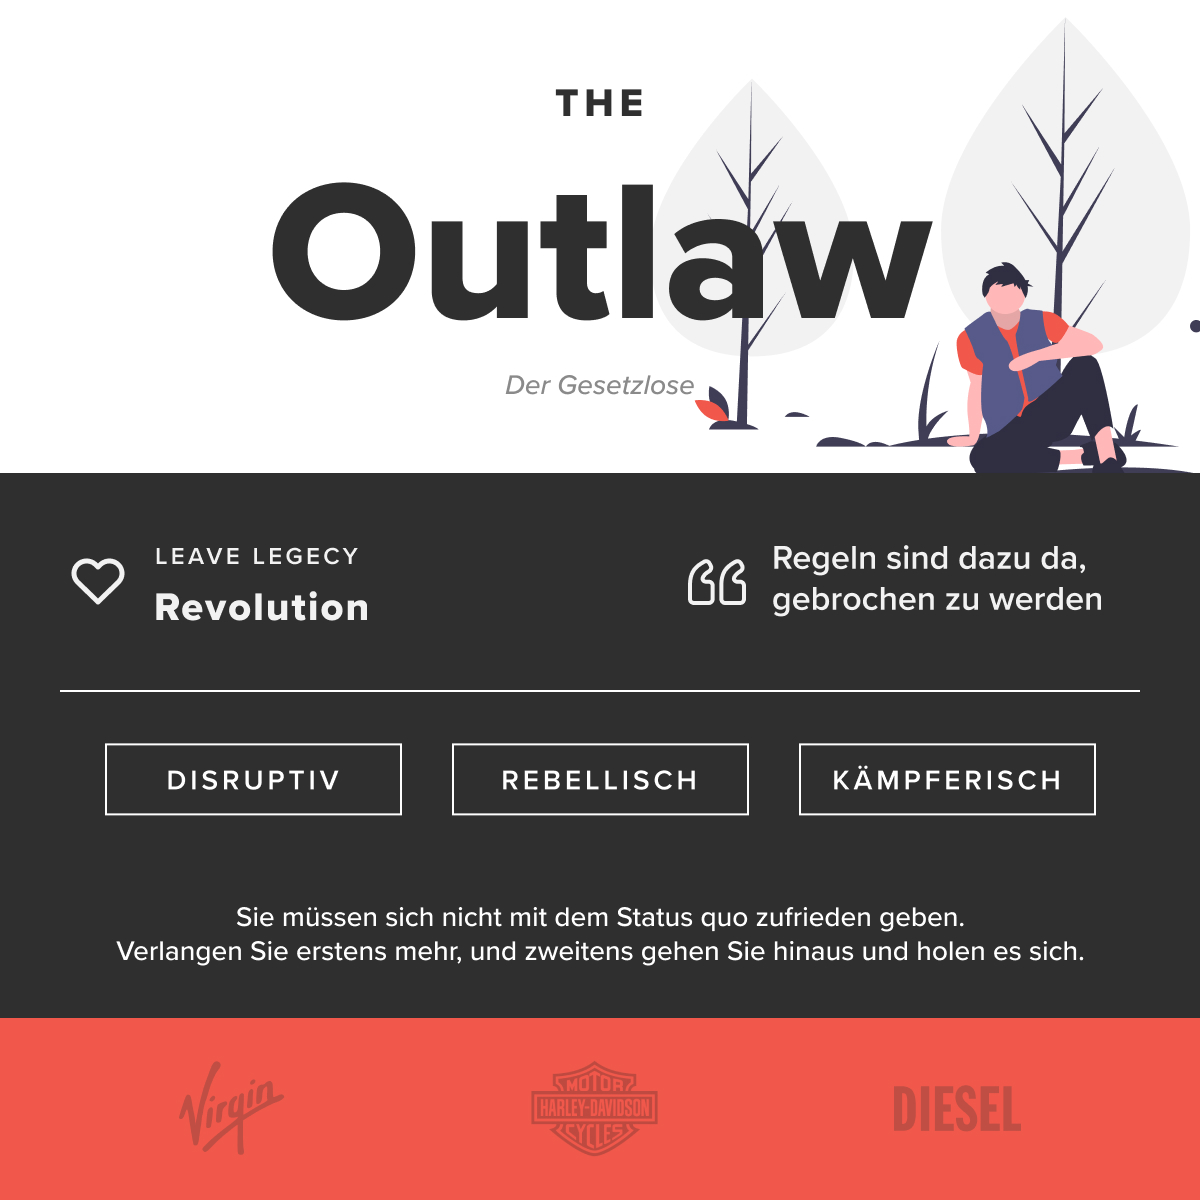 The outlaw is a website with an image of a man and a woman.